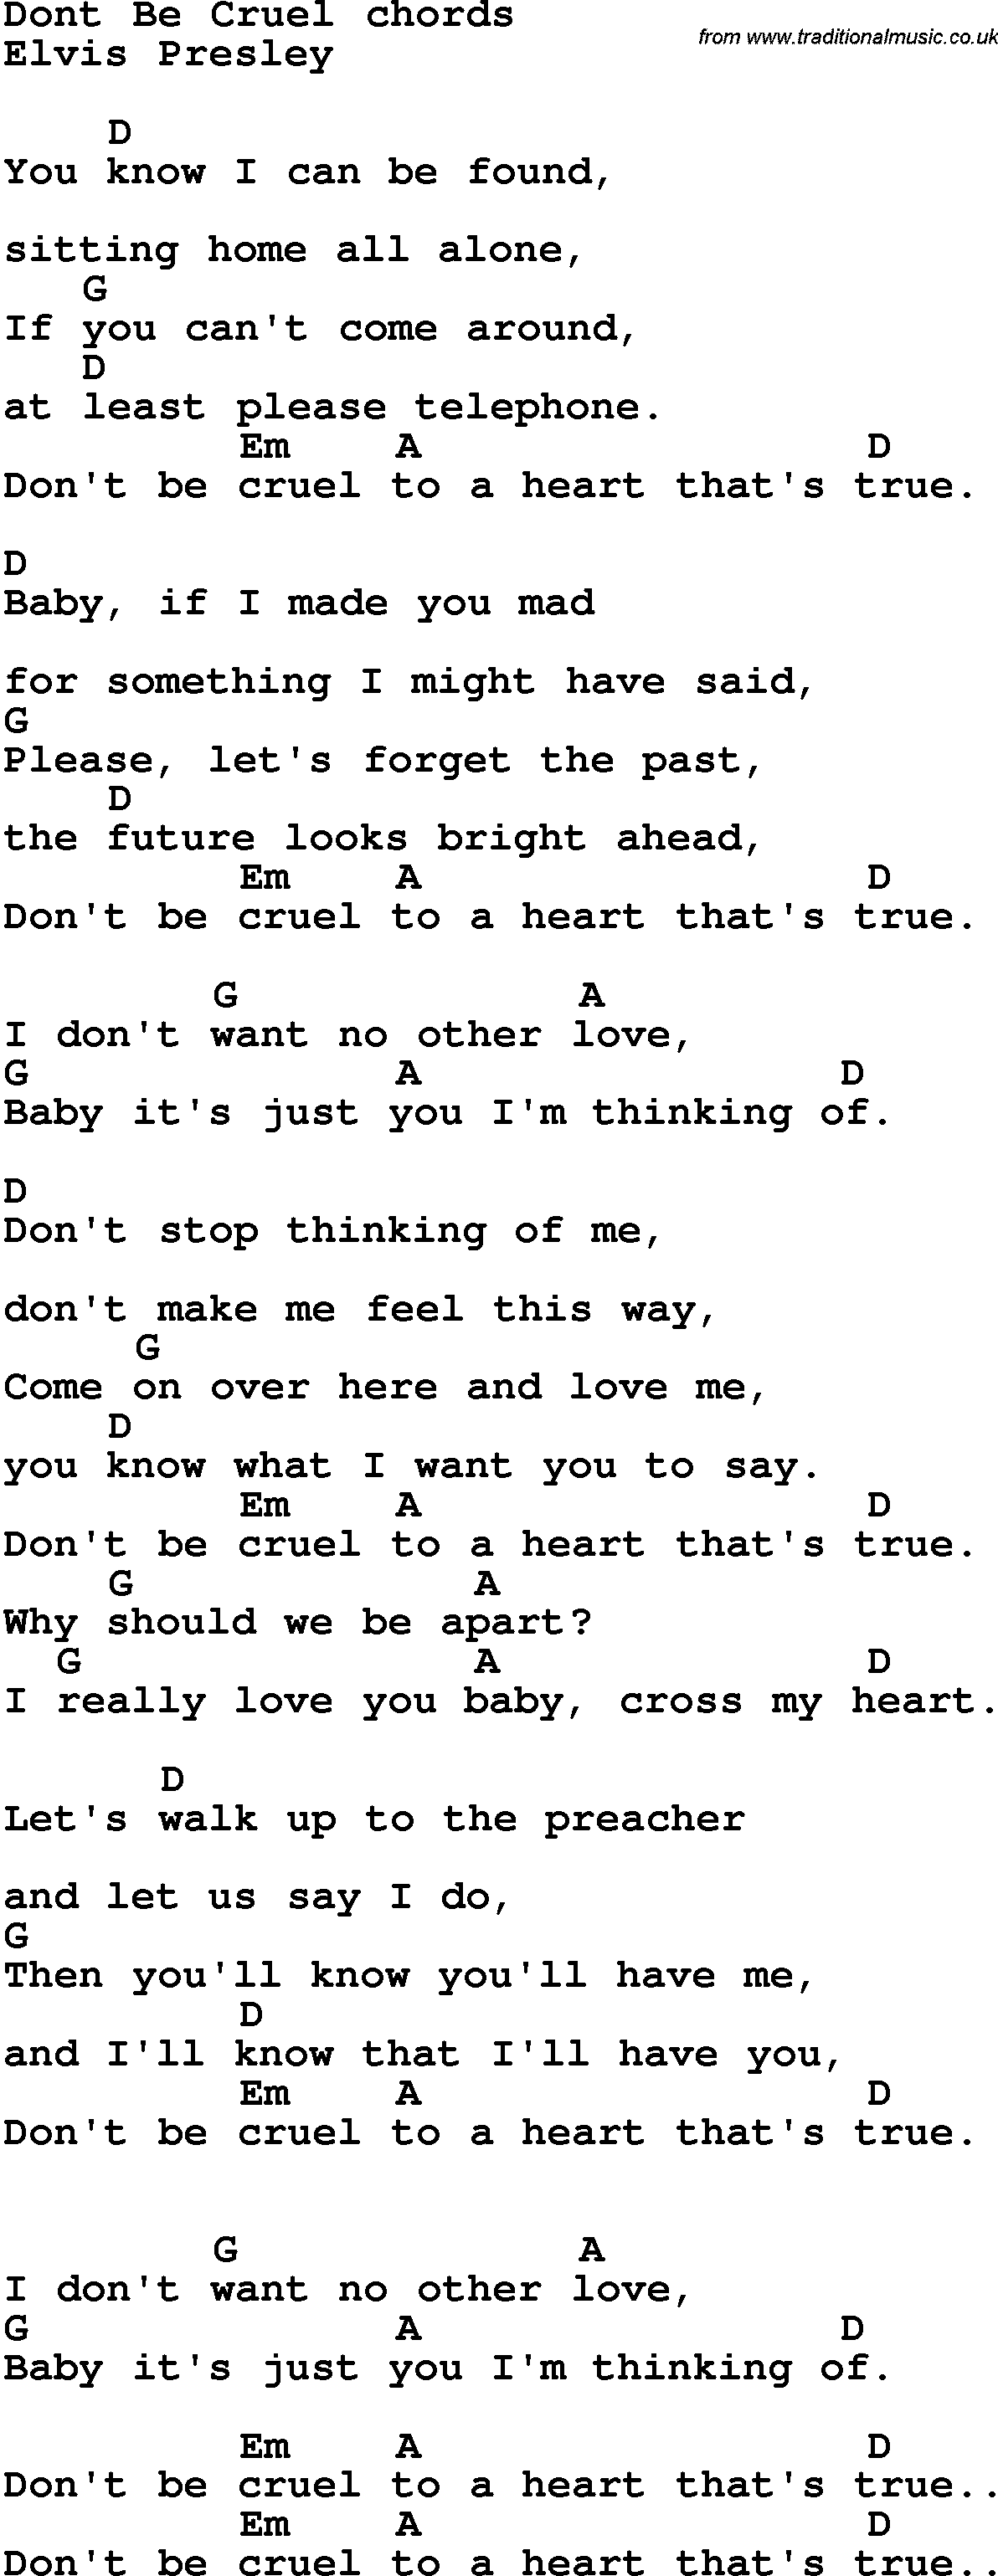 Song Lyrics with guitar chords for Don't Be Cruel